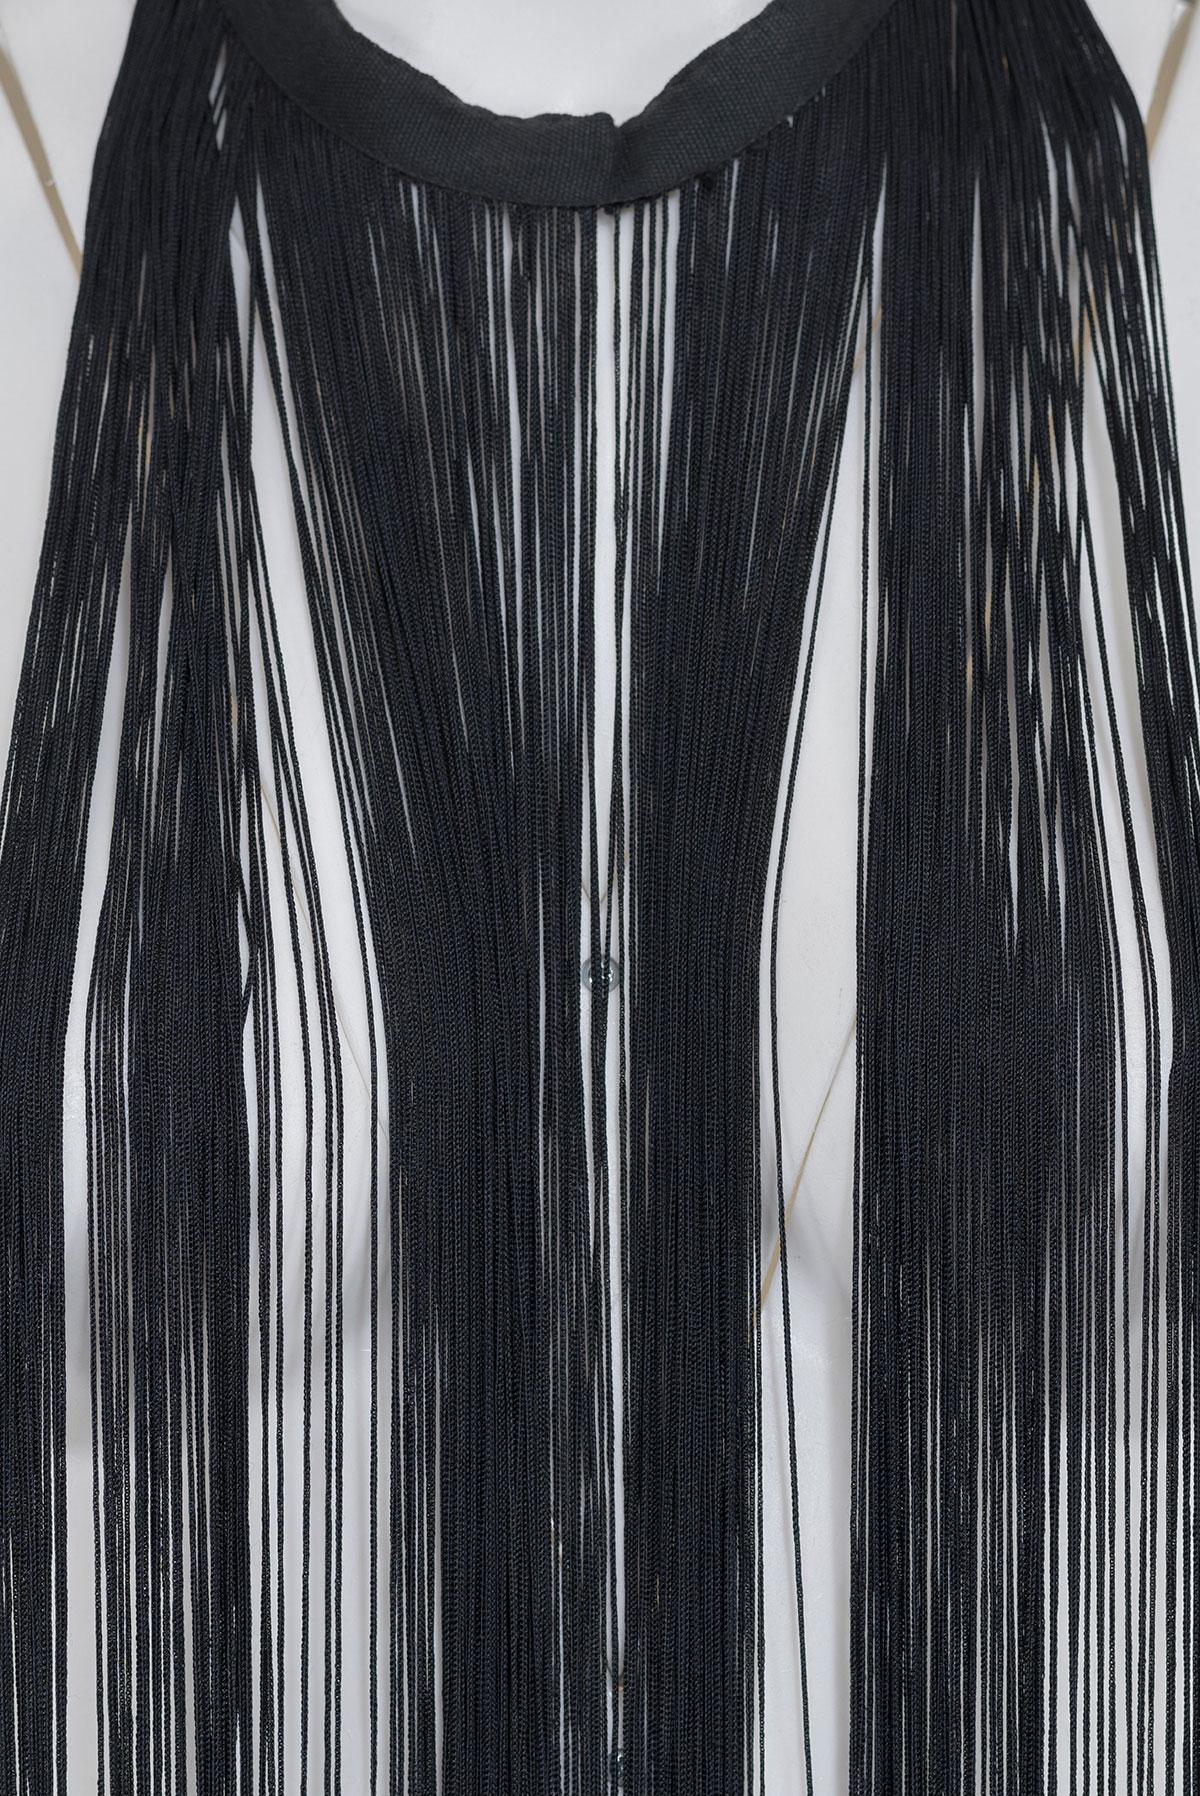 MAISON MARTIN MARGIELA FW 96 Rare Long Fringes Necklace In Excellent Condition For Sale In Milano, MILANO